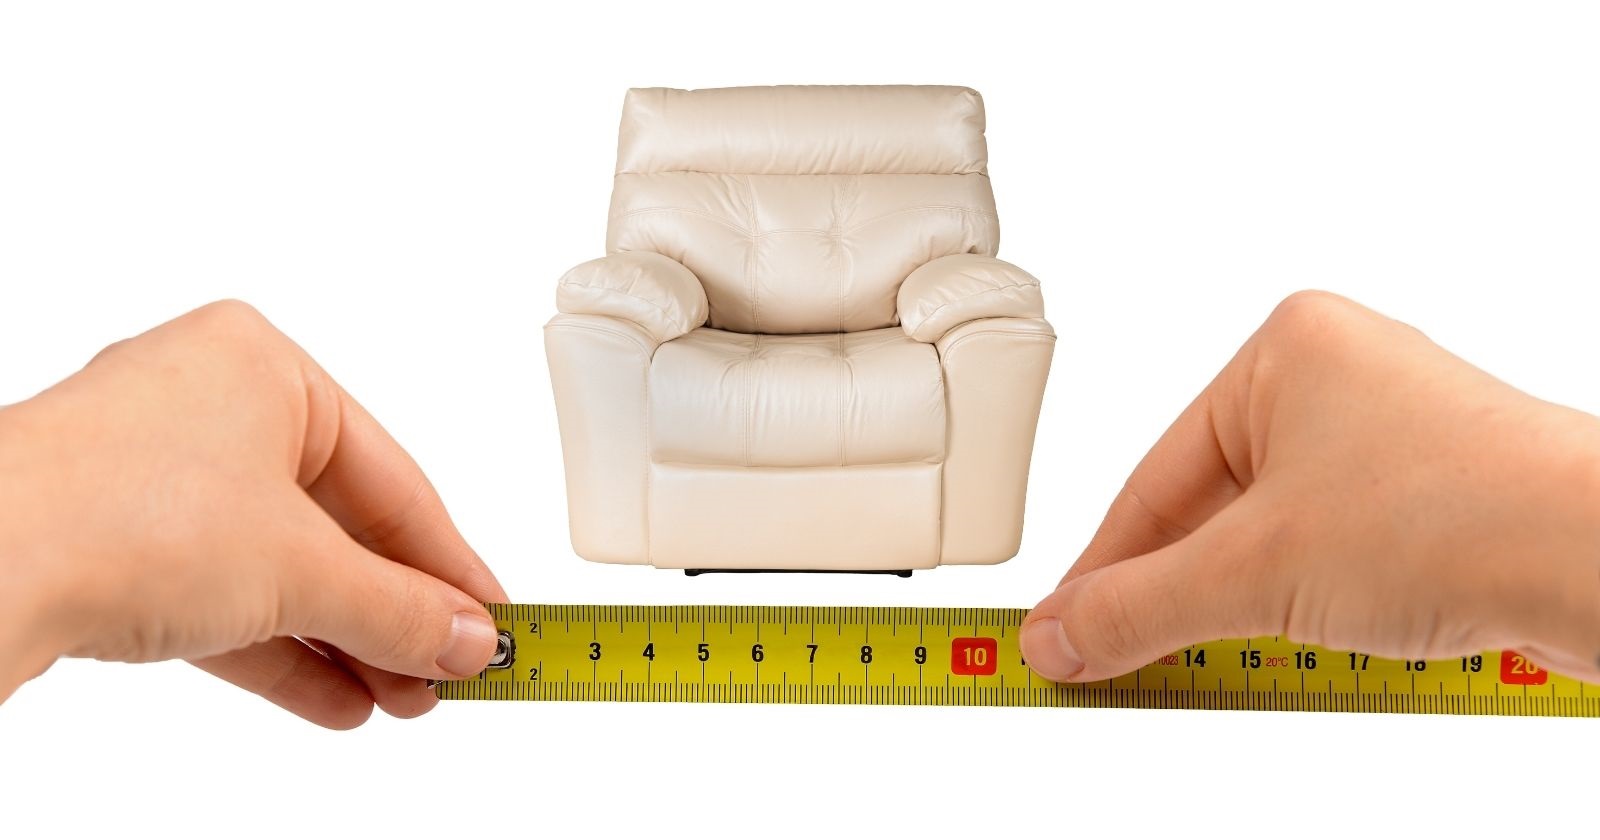 How To Measure Recliner